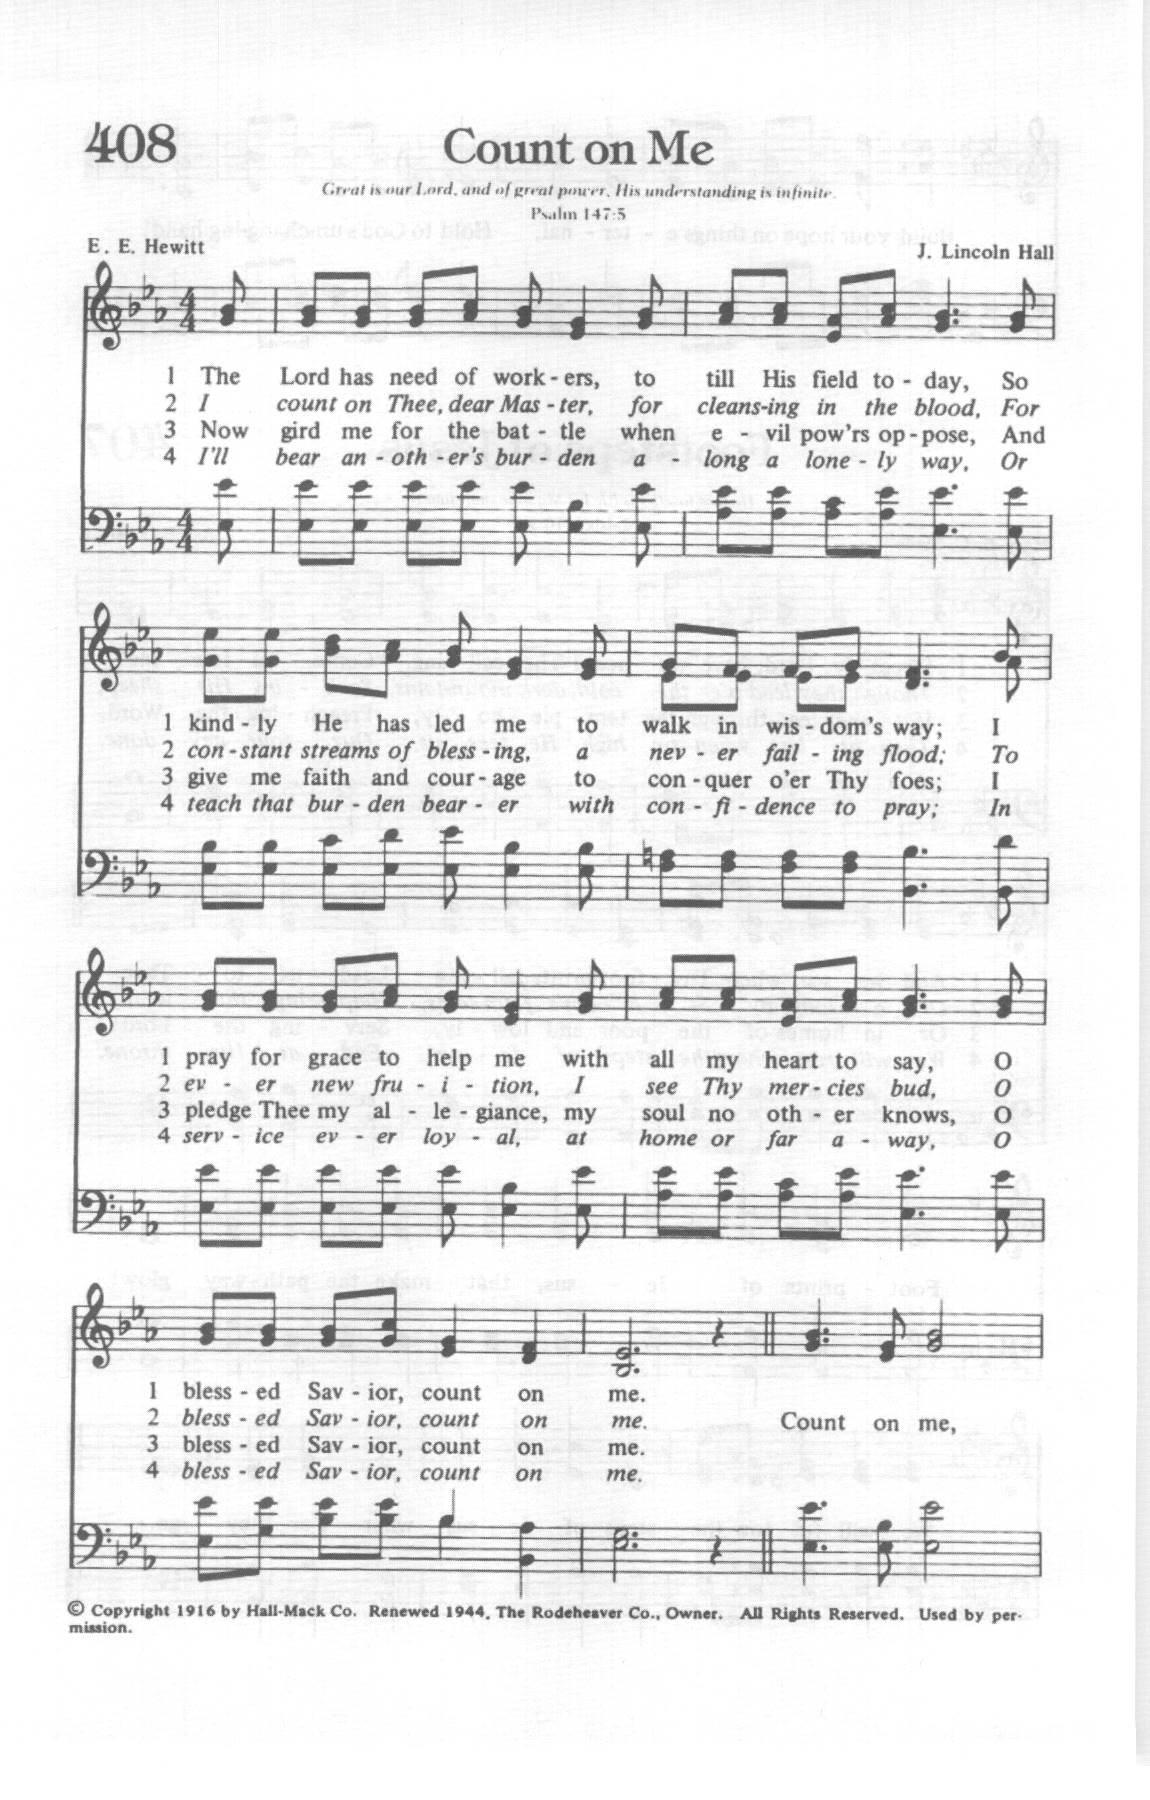 Yes, Lord!: Church of God in Christ hymnal page 438